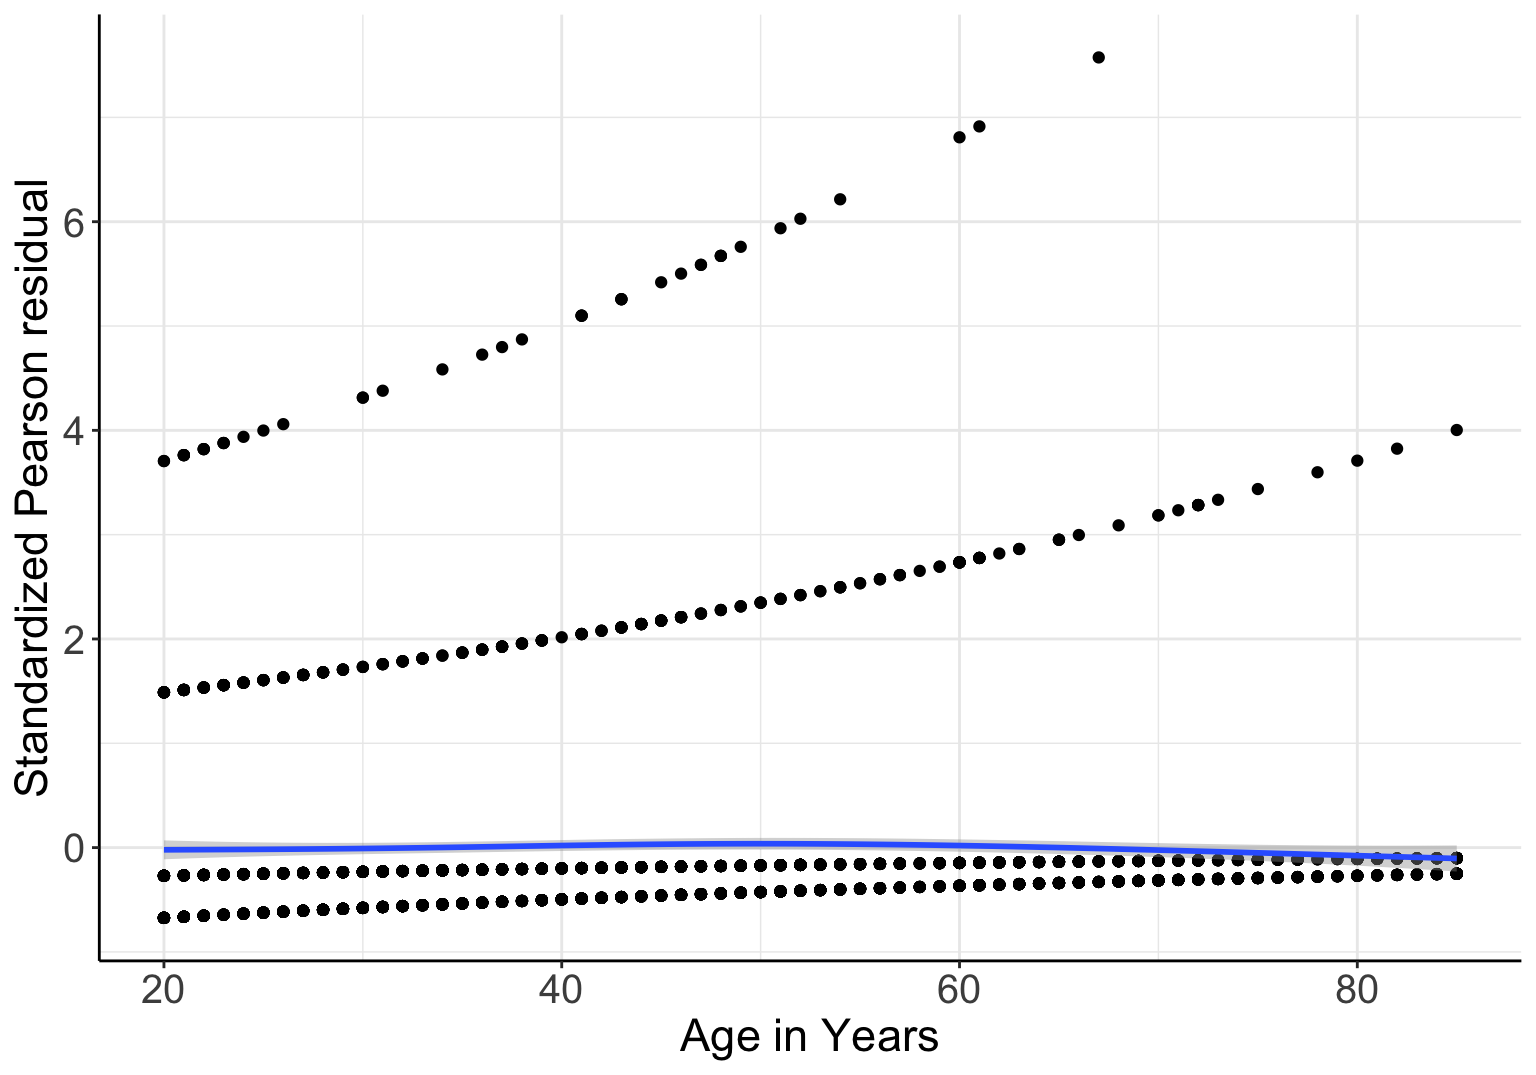 Standardized Pearson residuals agianst age, in logistic model with gender and linear age as covariates